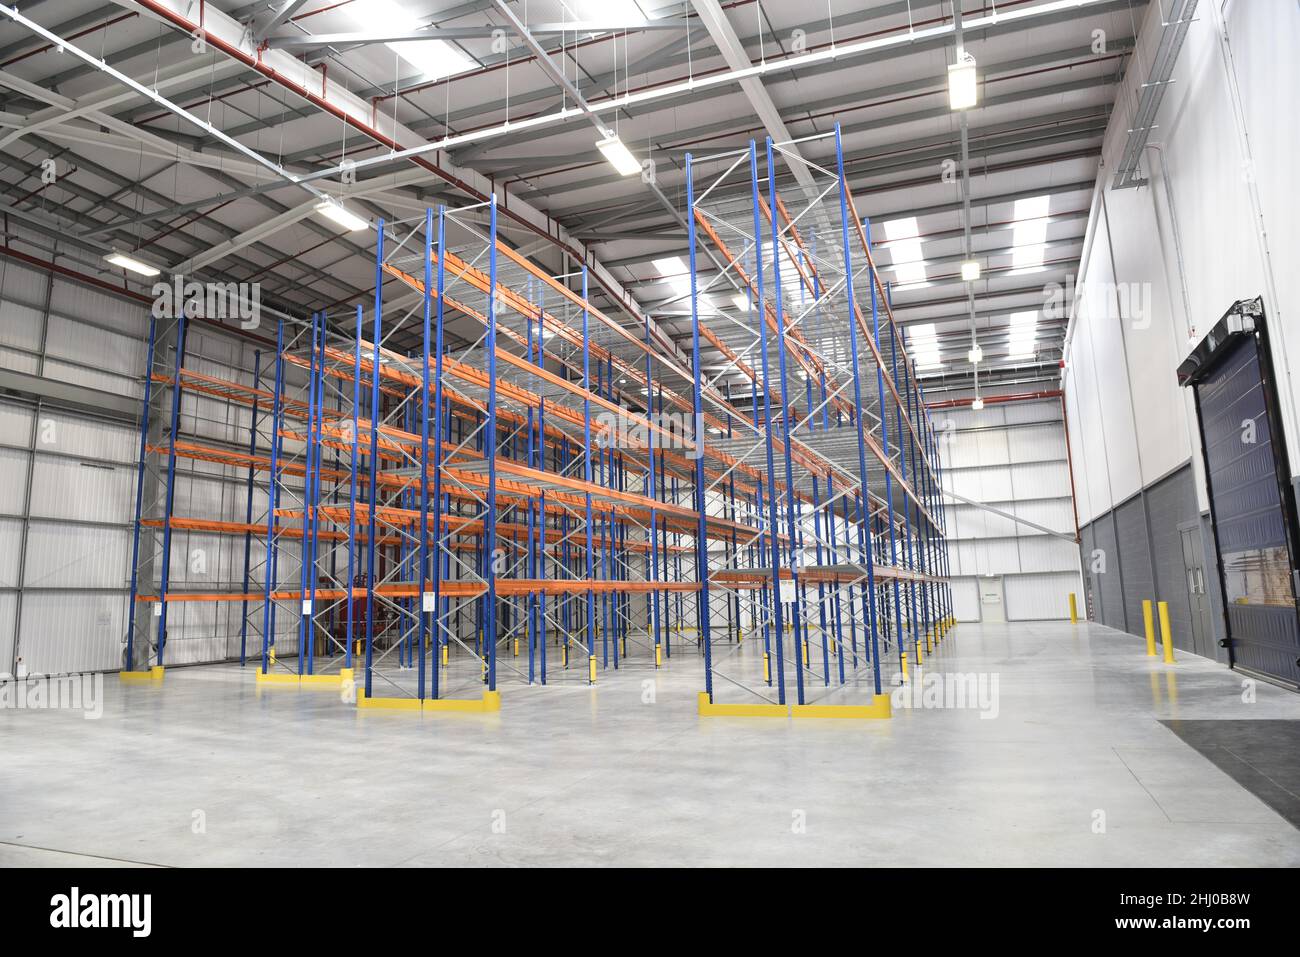 Empty shelves in a new warehouse. Racks in a distribution stockhouse. Concept suggesting supply shortages, logisitcal problems or stock issues. Stock Photo